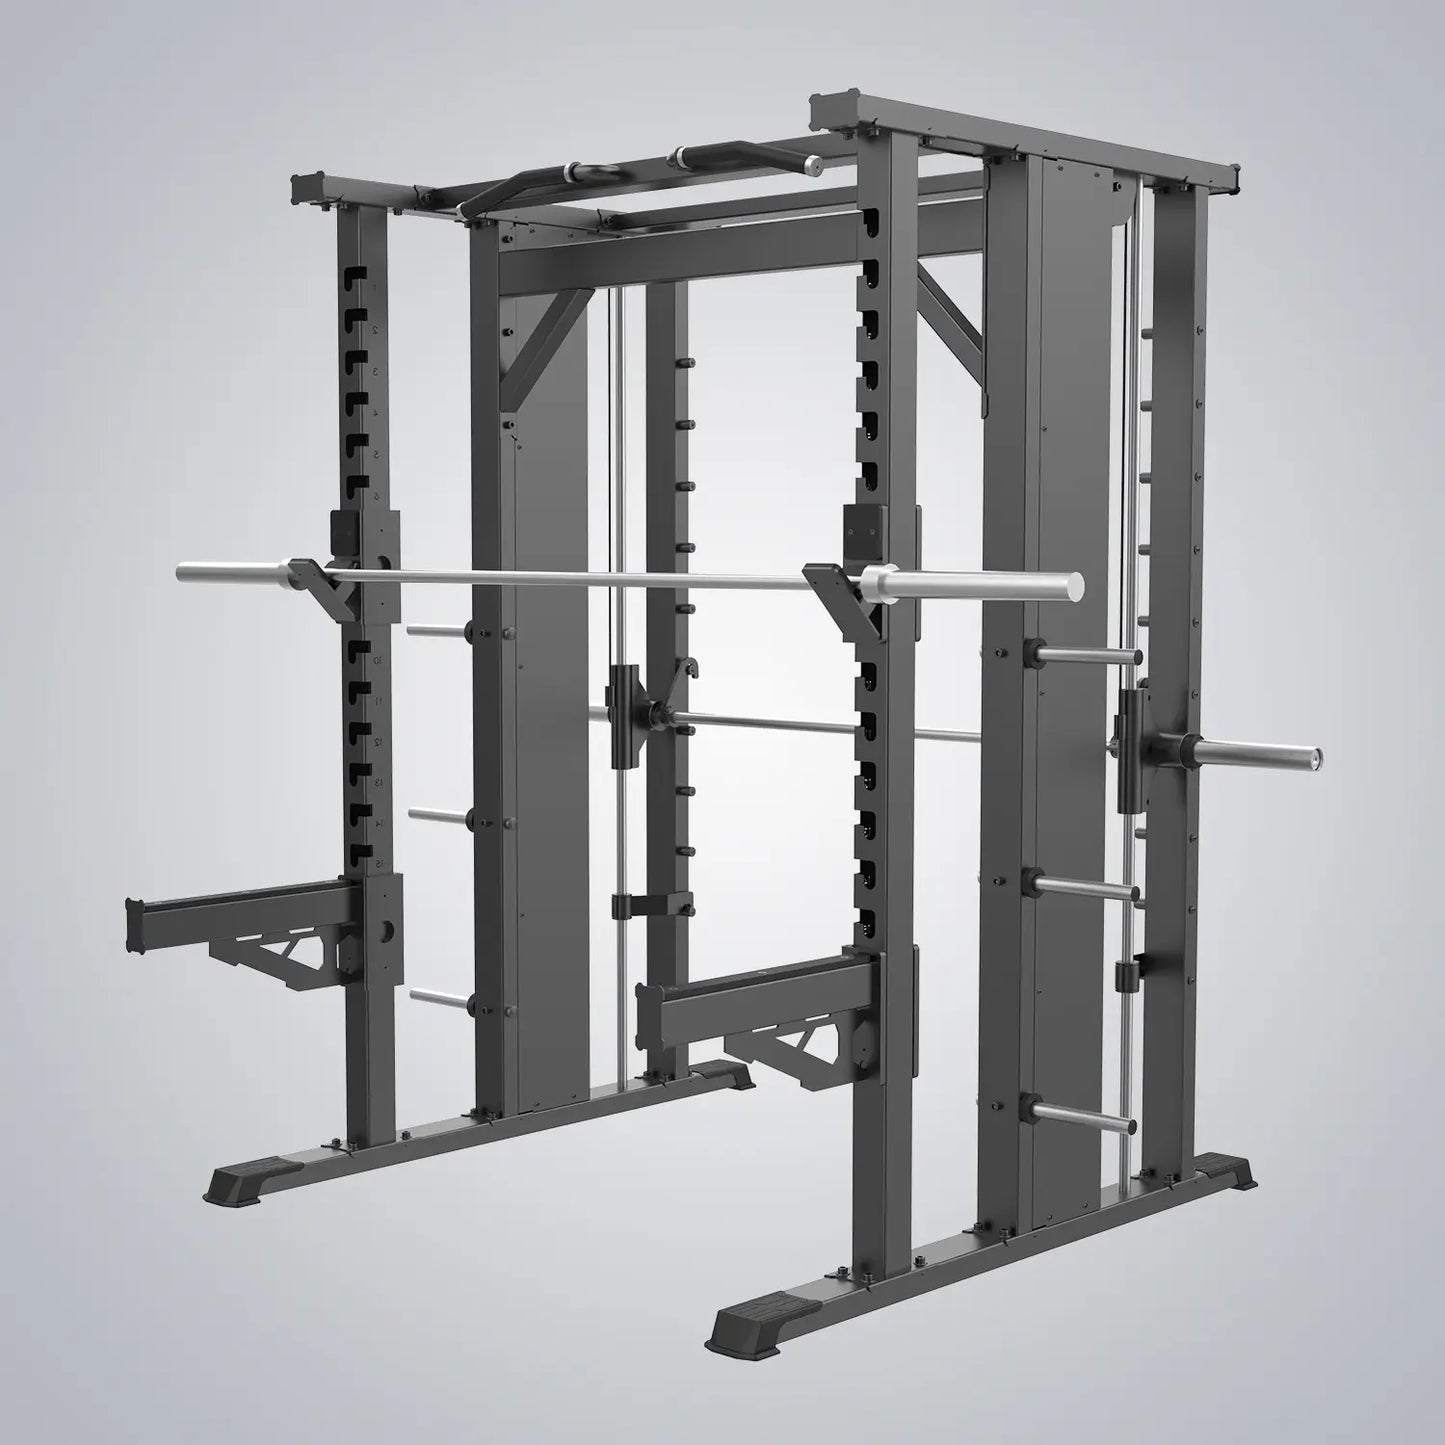 Gamma Fitness Commercial Smith Machine With Power Rack Combo CPR-60 For Commercial Gym Setup